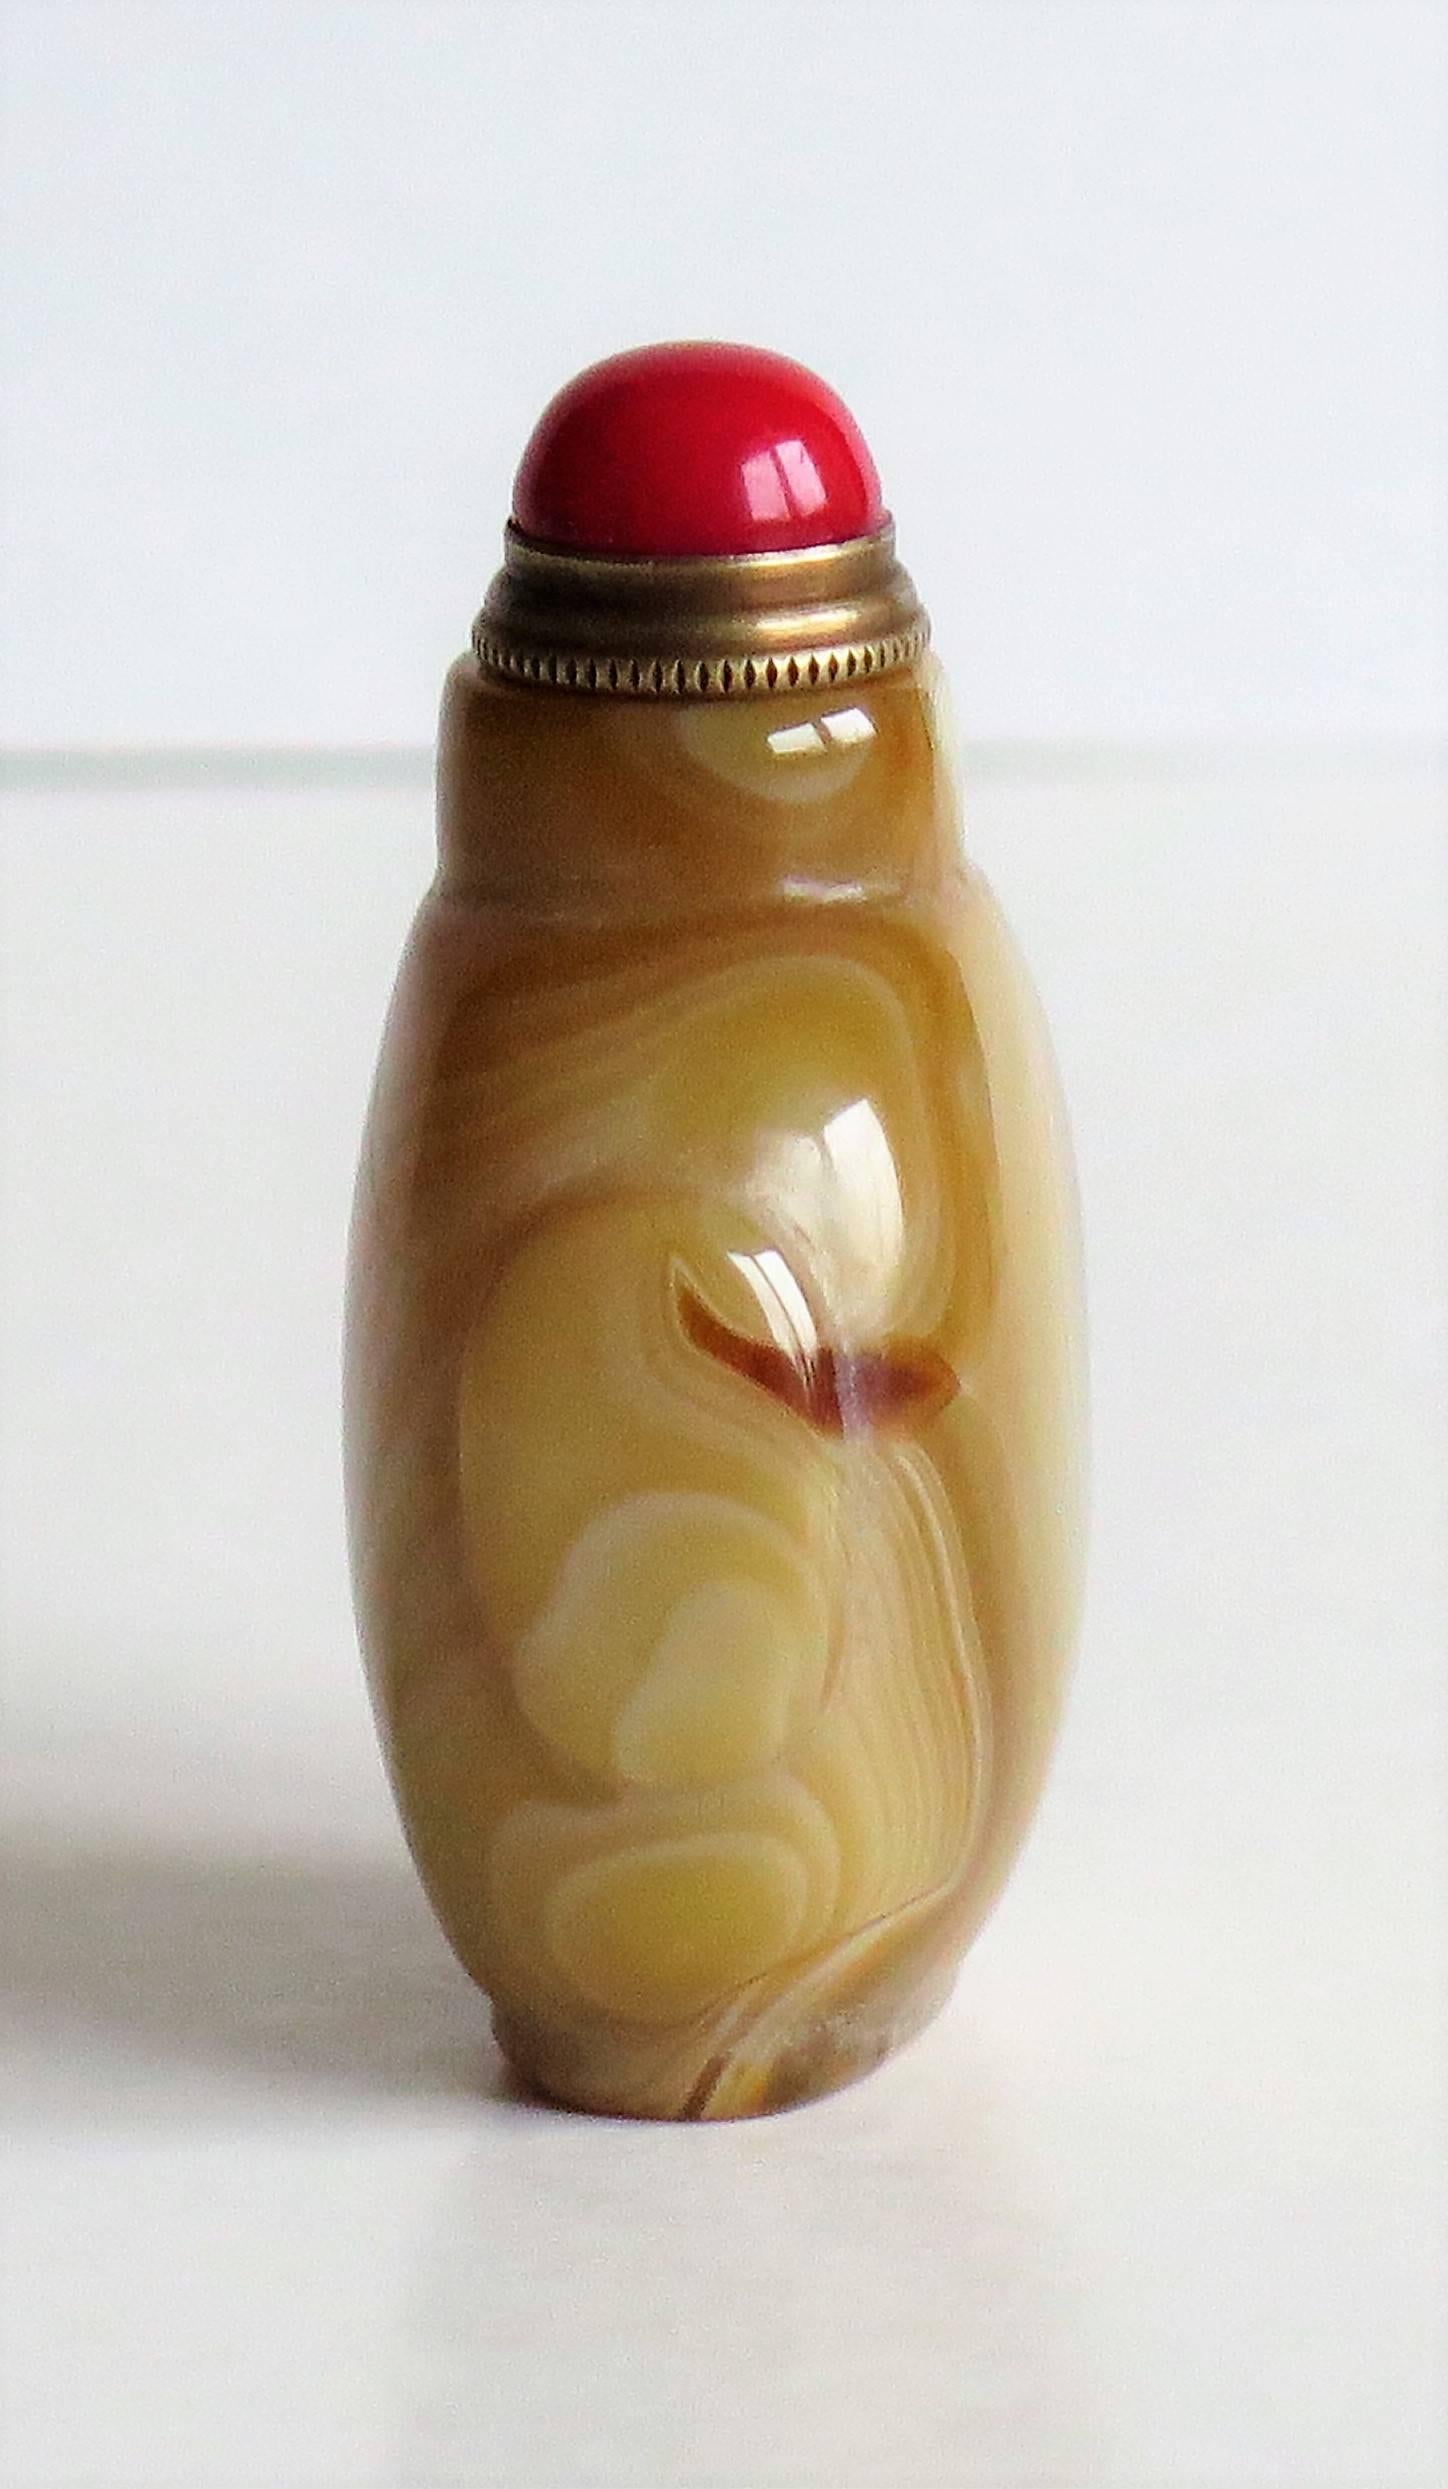 Qing Chinese Snuff Bottle Natural Agate Red Ceramic Stopper and Spoon, circa 1930